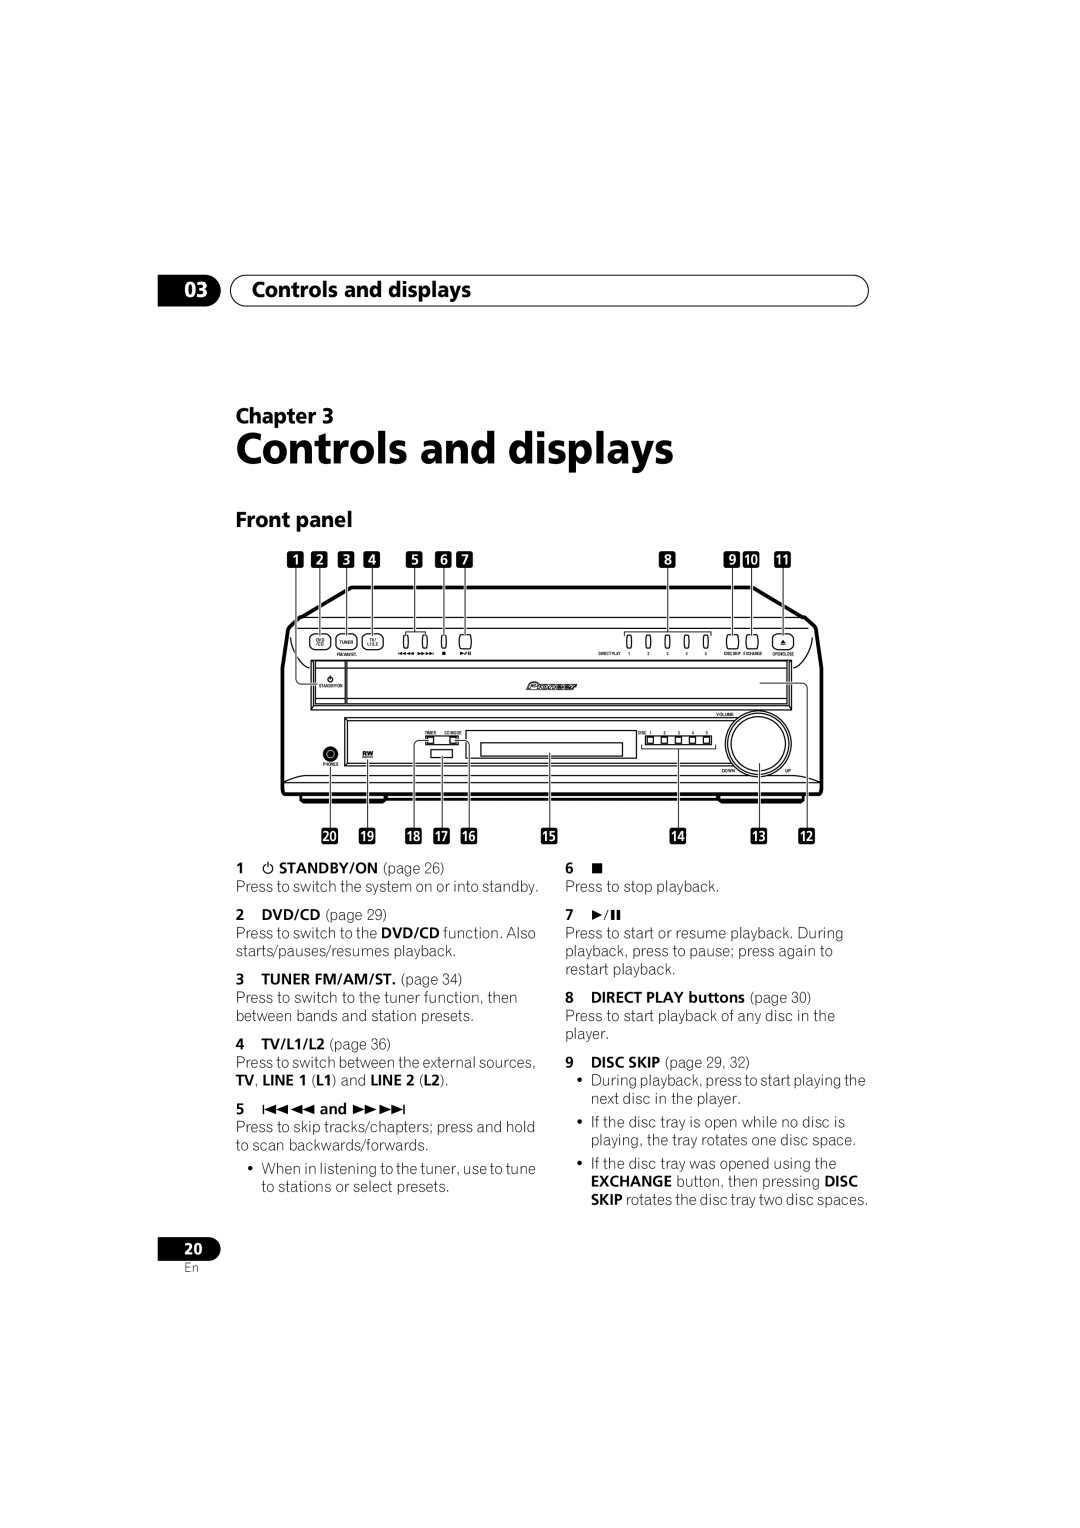 Pioneer S-HTD330 manual 03Controls and displays Chapter, Front panel 